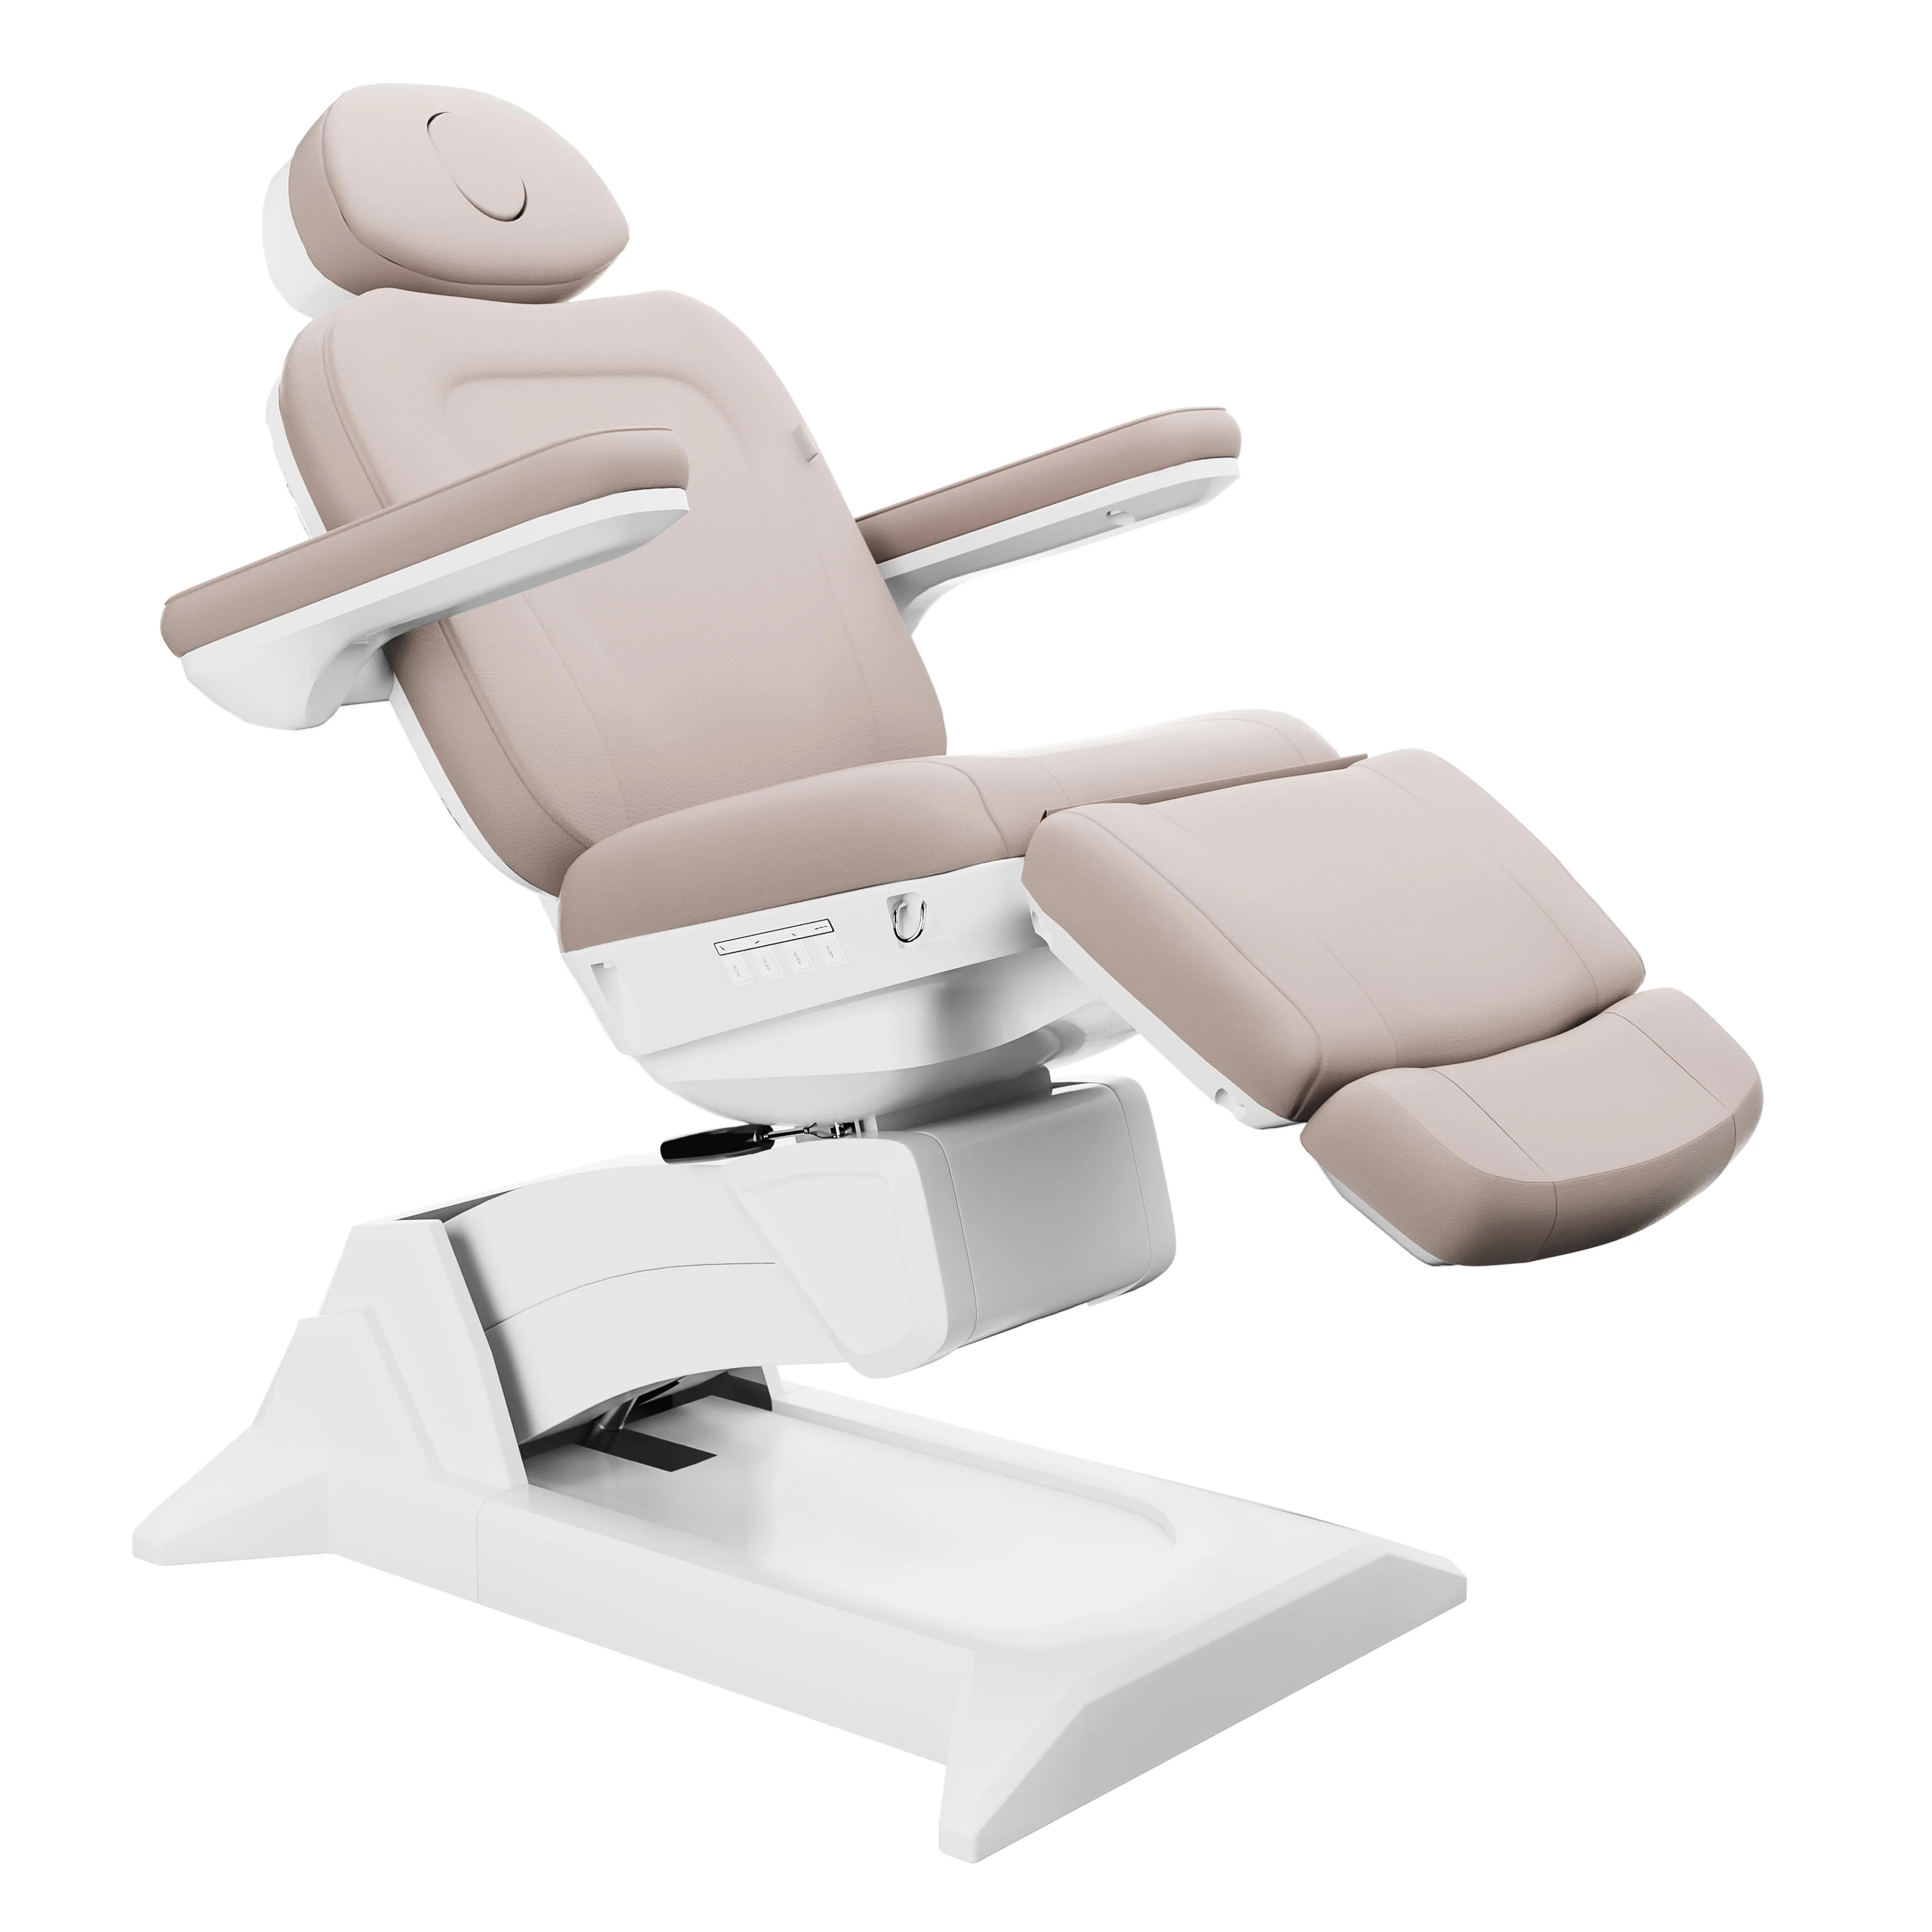 SpaMarc . Ultera (Taupe) . Rotating . 4 Motor Spa Treatment Chair/Bed